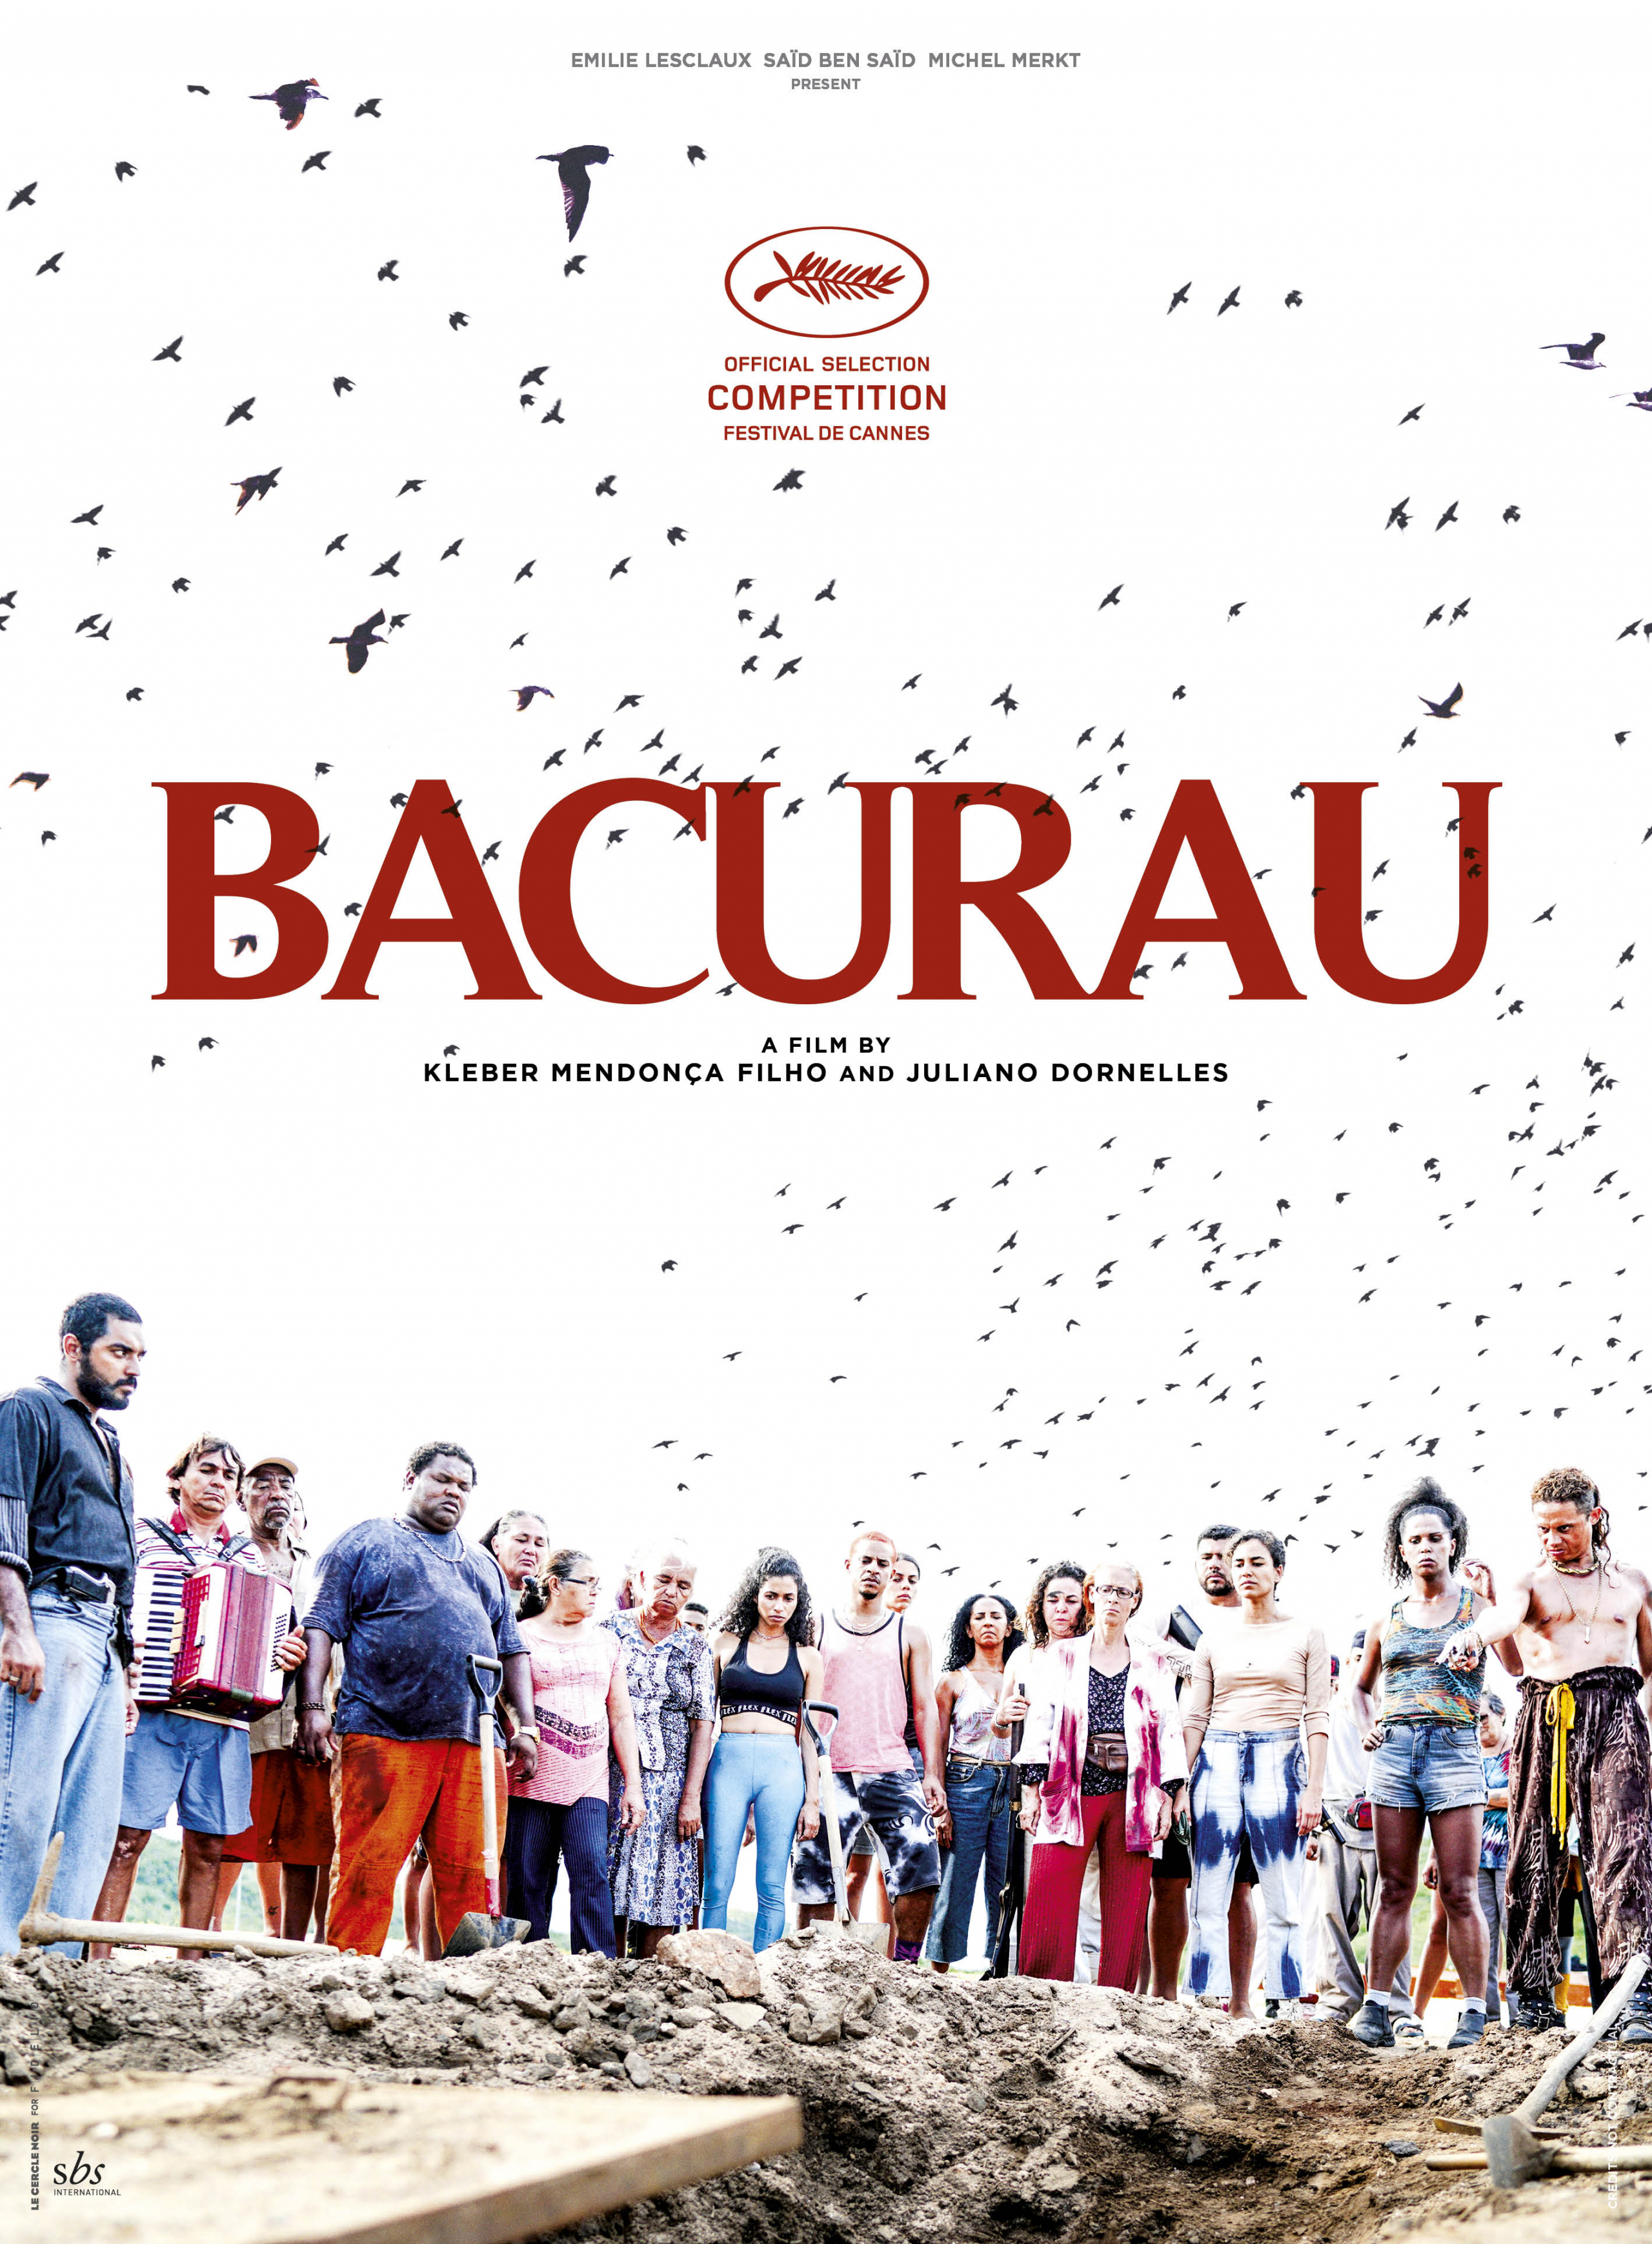 Bacurau first look review Cannes Film Festival 2019